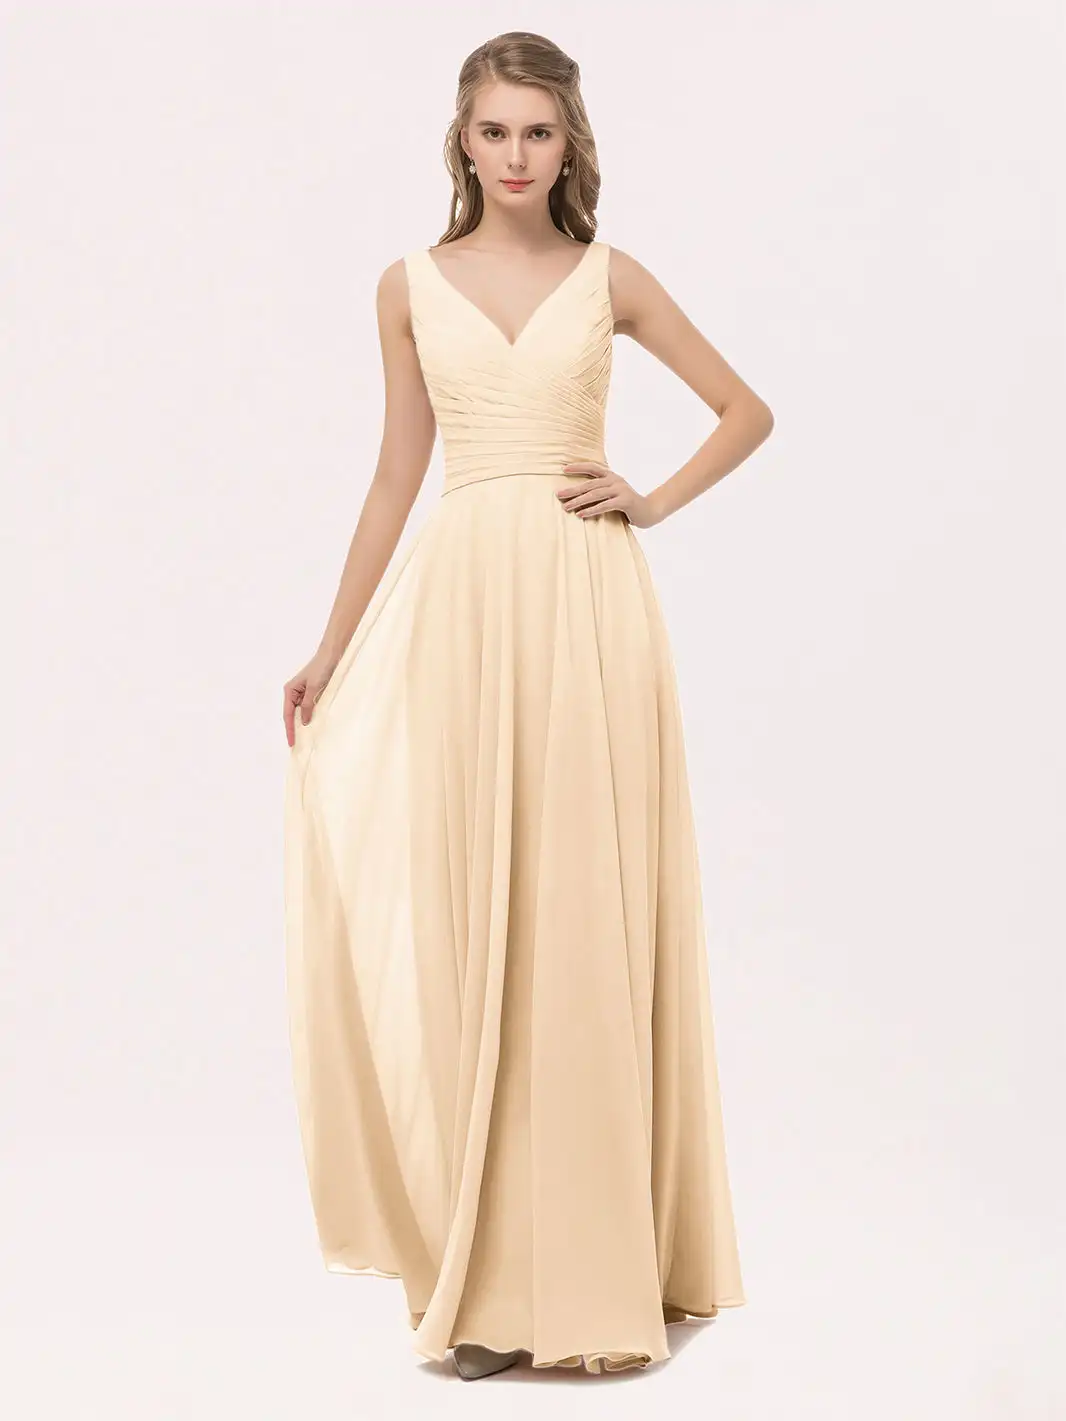 

Classic V Neck Long Chiffon Bridesmaid Dress With Bow Sashes A-line Sleeveless Wedding Cocktail Dresses Pleated Evening Gowns